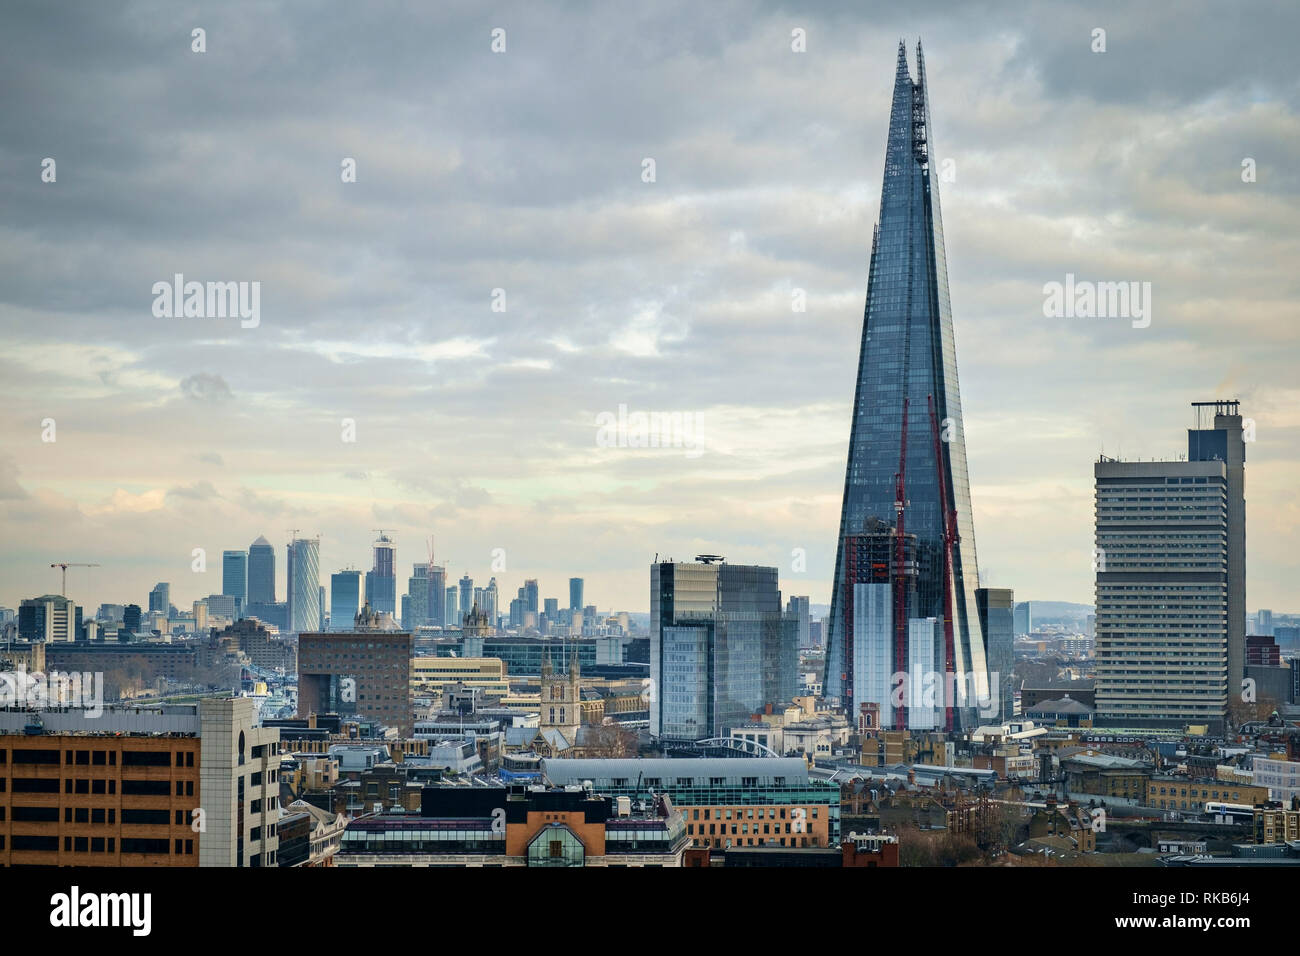 The Shard, with Canary Wharf in the background, London, United Kingdom 2019 Stock Photo